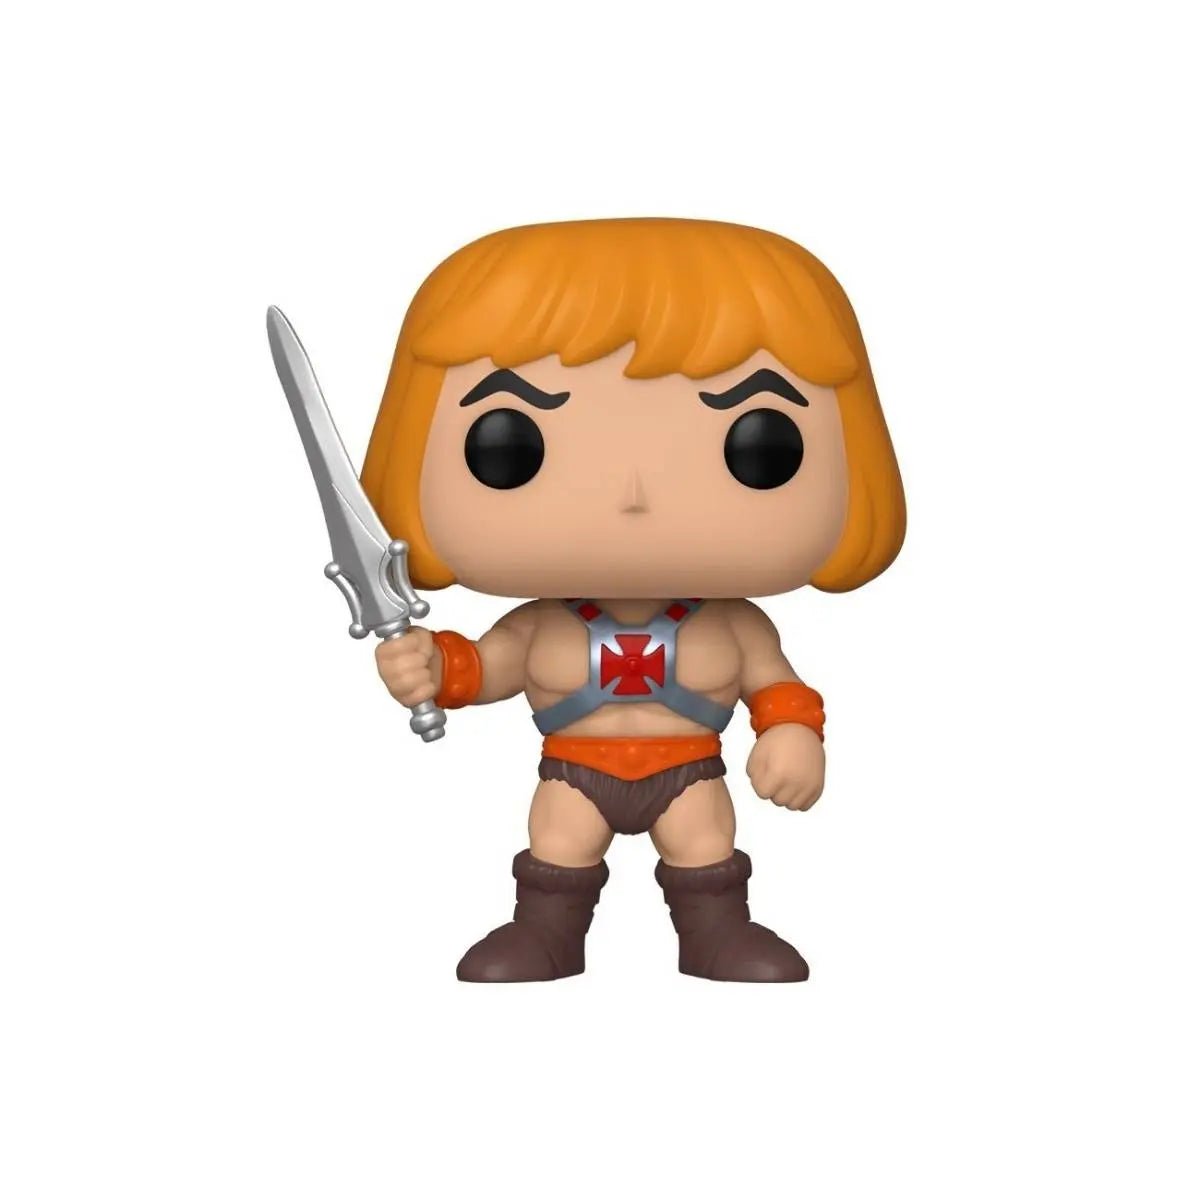 Pop! Vinyl - Masters Of The Universe - He-Man - Simon's Collectibles